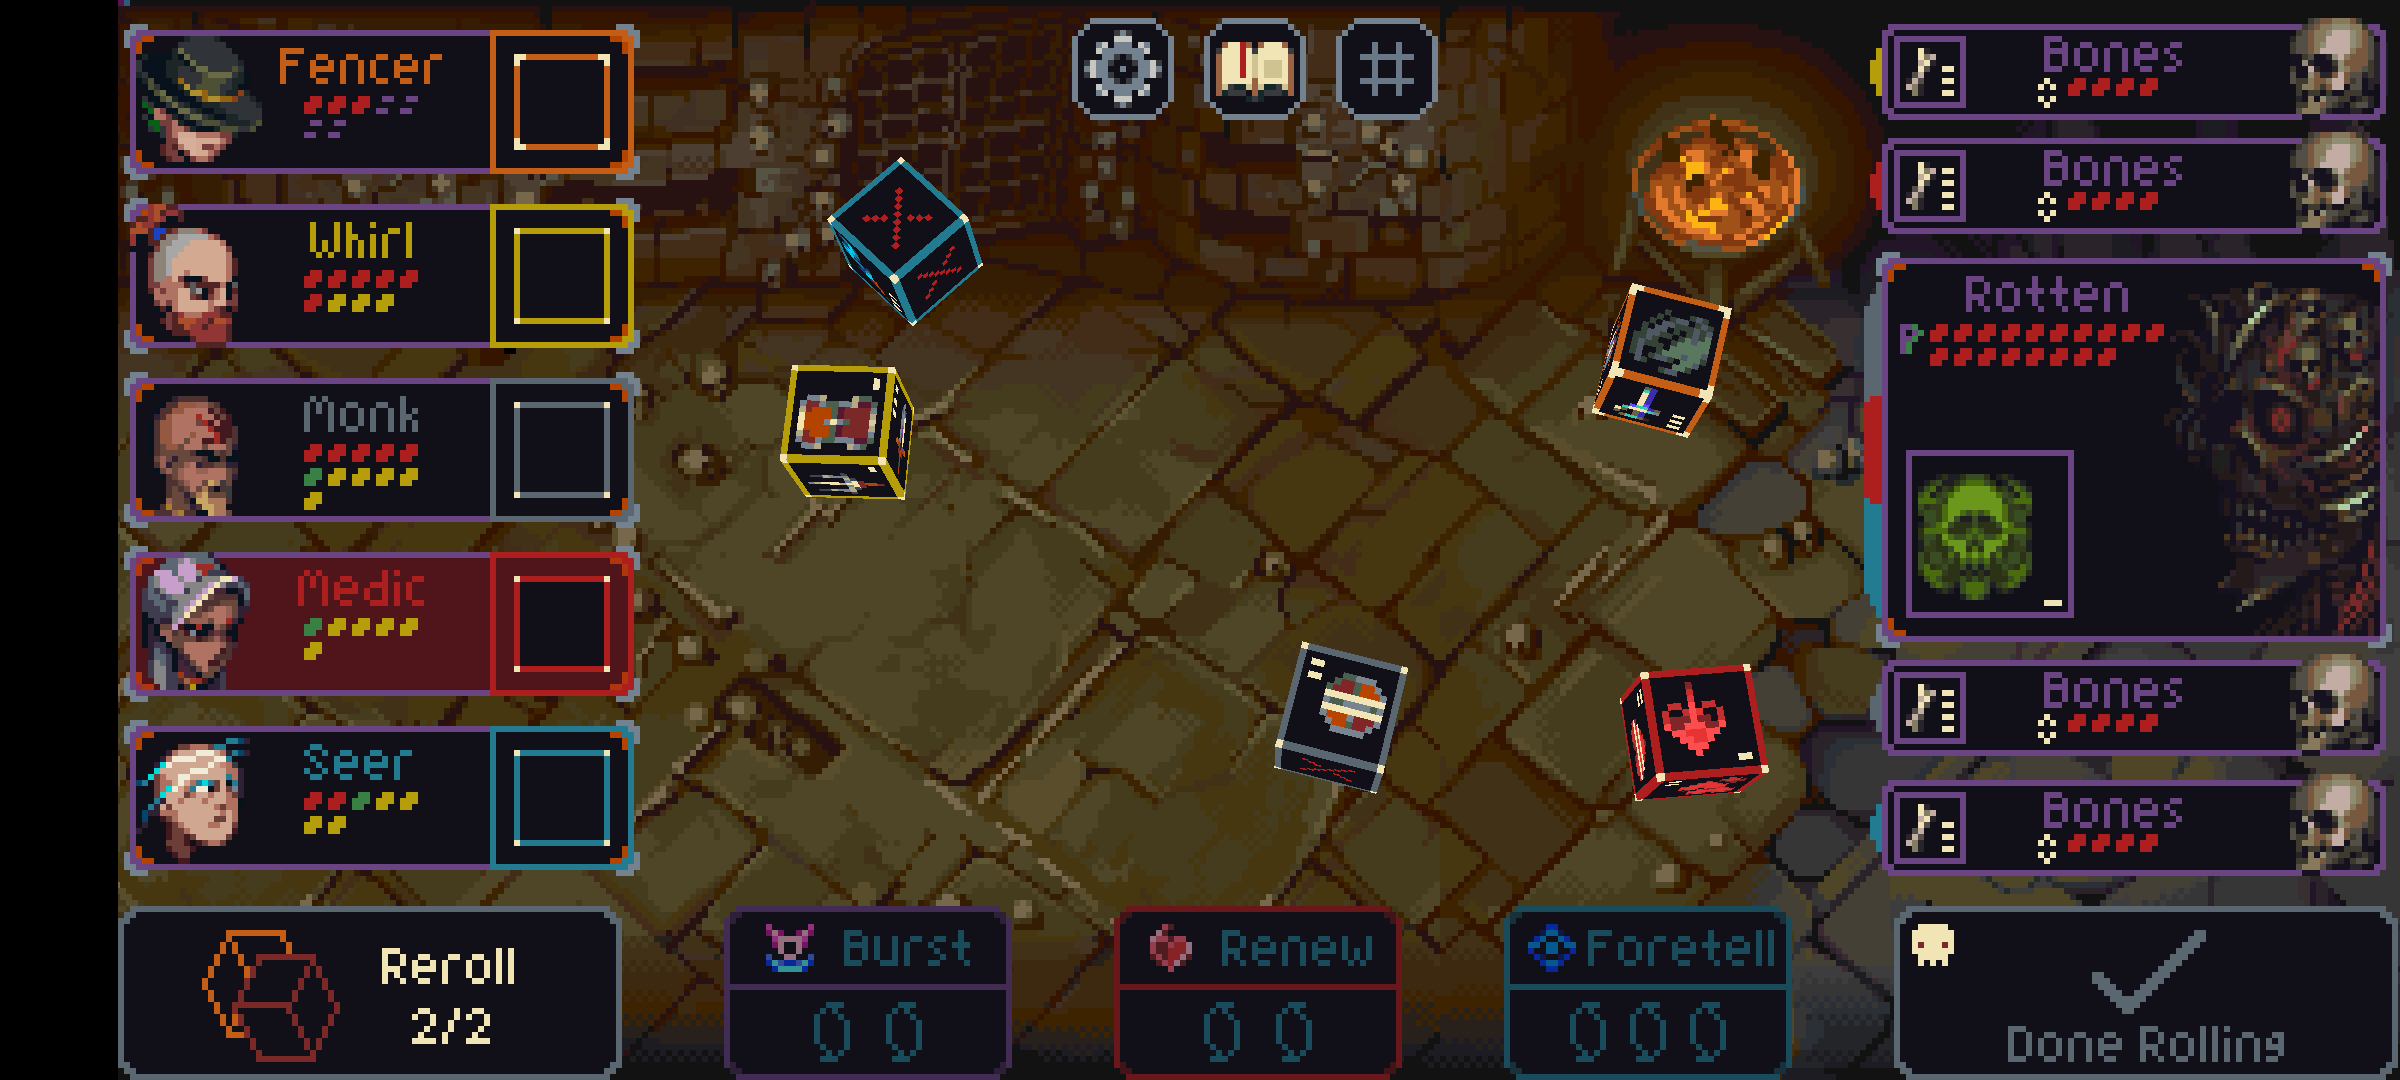 A pixelated dungeon-crawling game on a phone, with character boxes on the left, enemies on the right, and dice rolled in the middle.